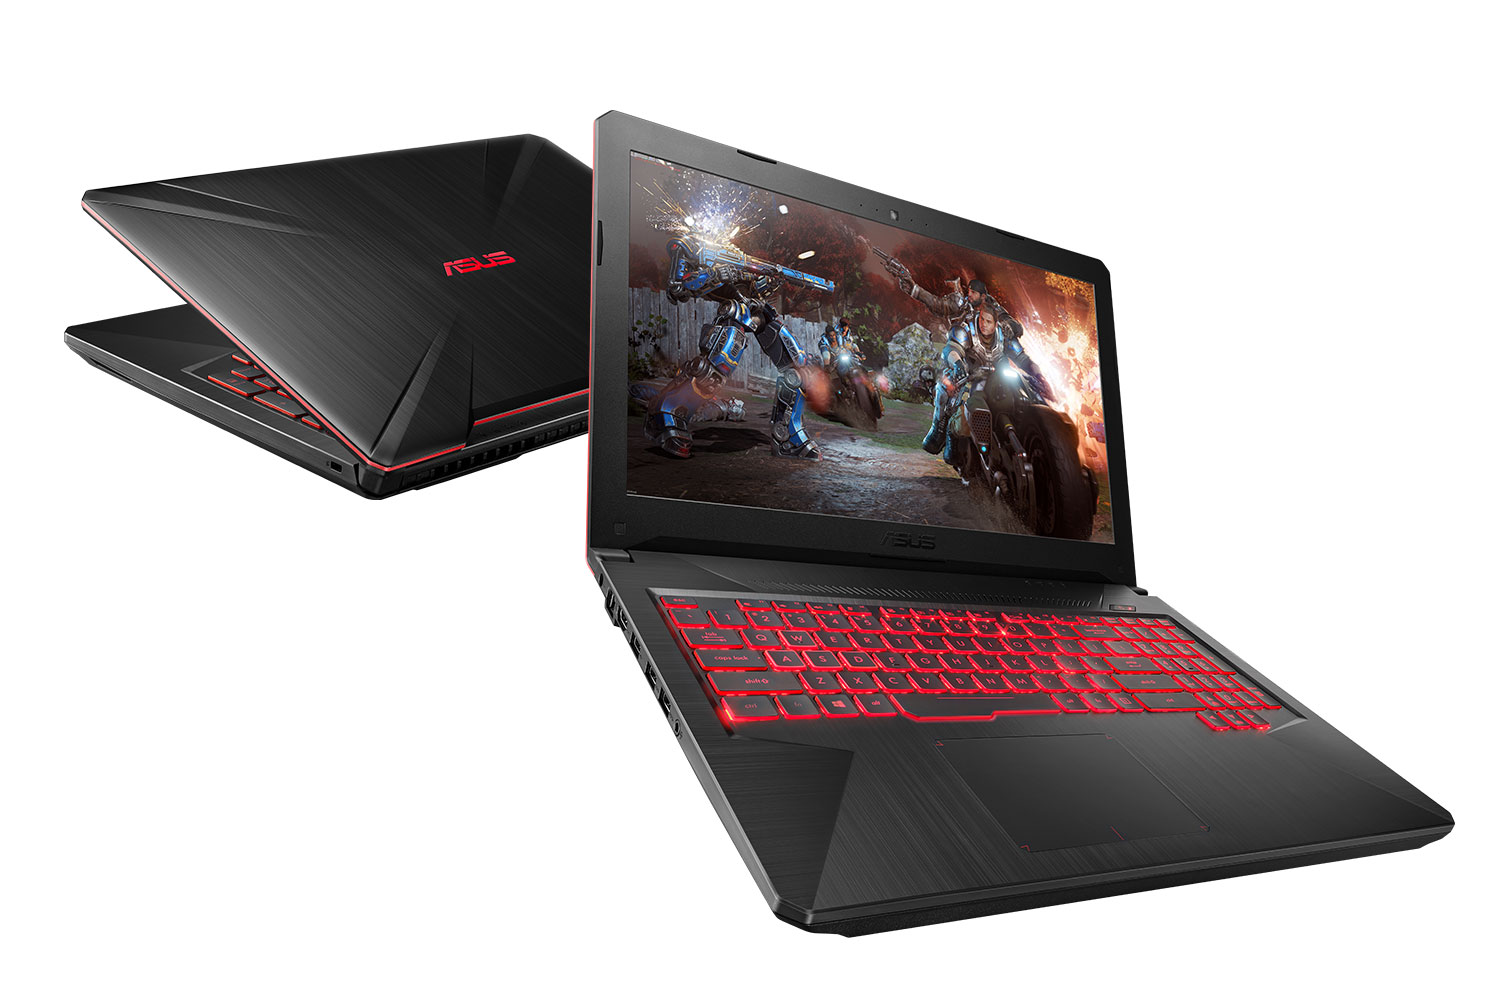 ASUS TUF Gaming FX504 Now Available with NVIDIA GeForce GTX 1060 Variant